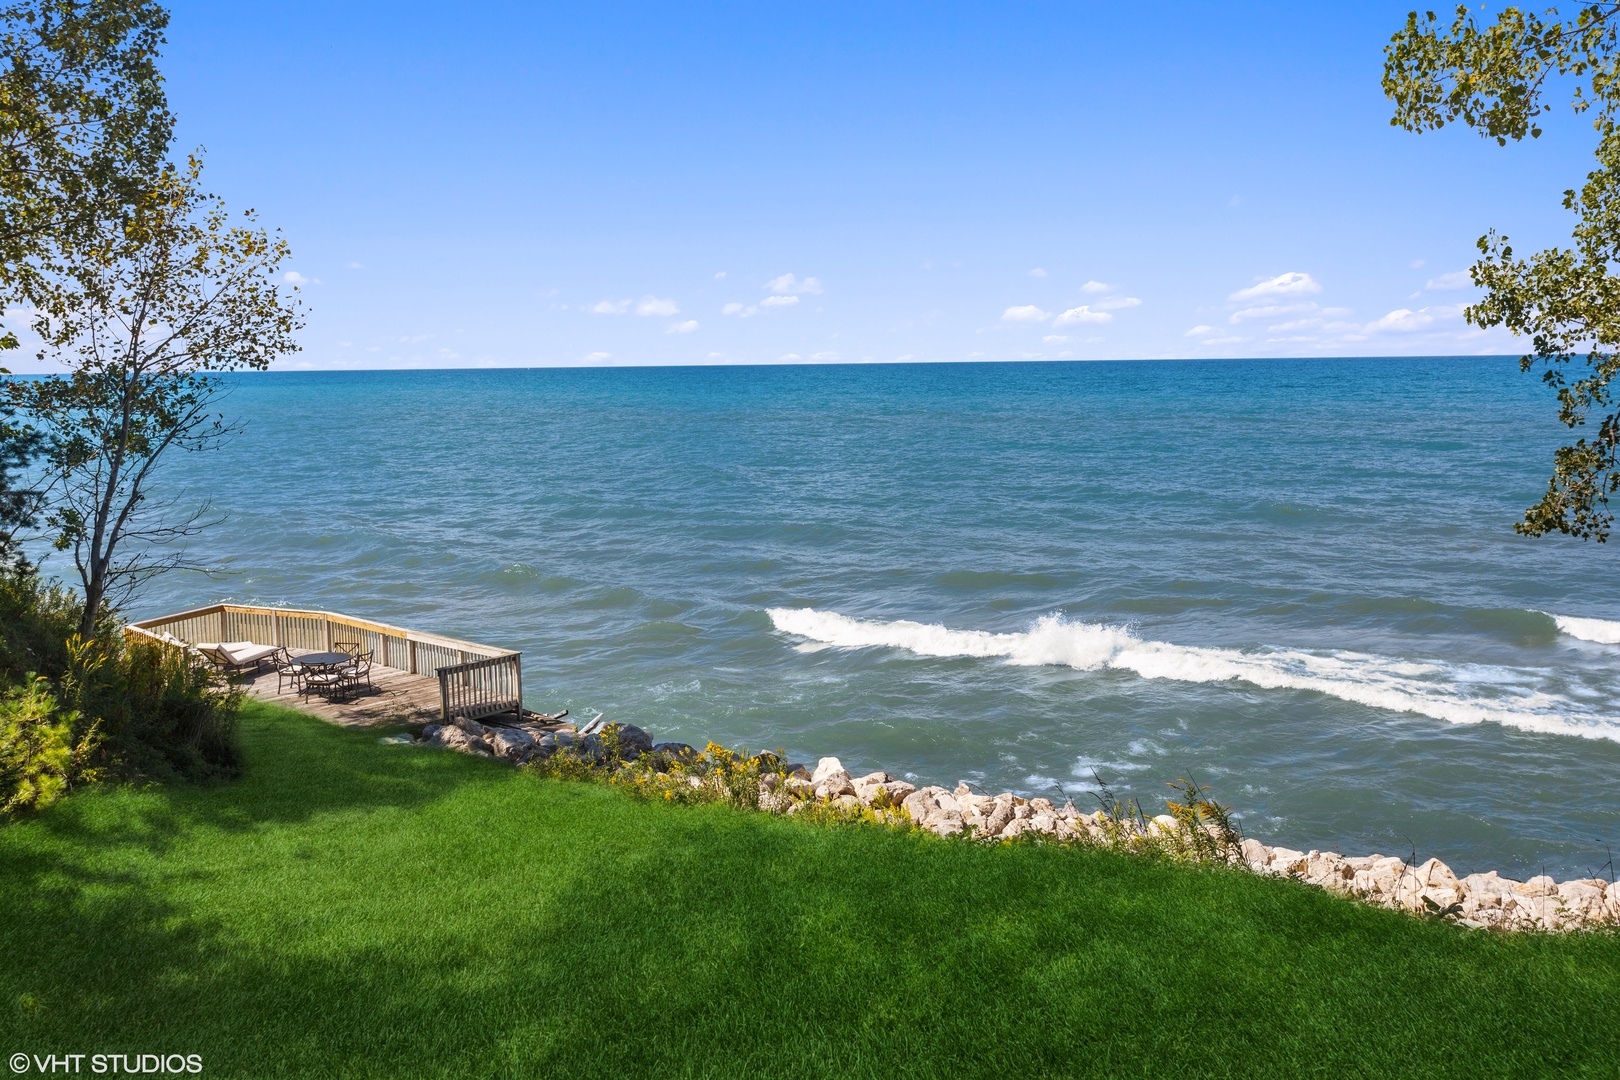 Our private deck on Lake Michigan, perfect for relaxing at sunset.